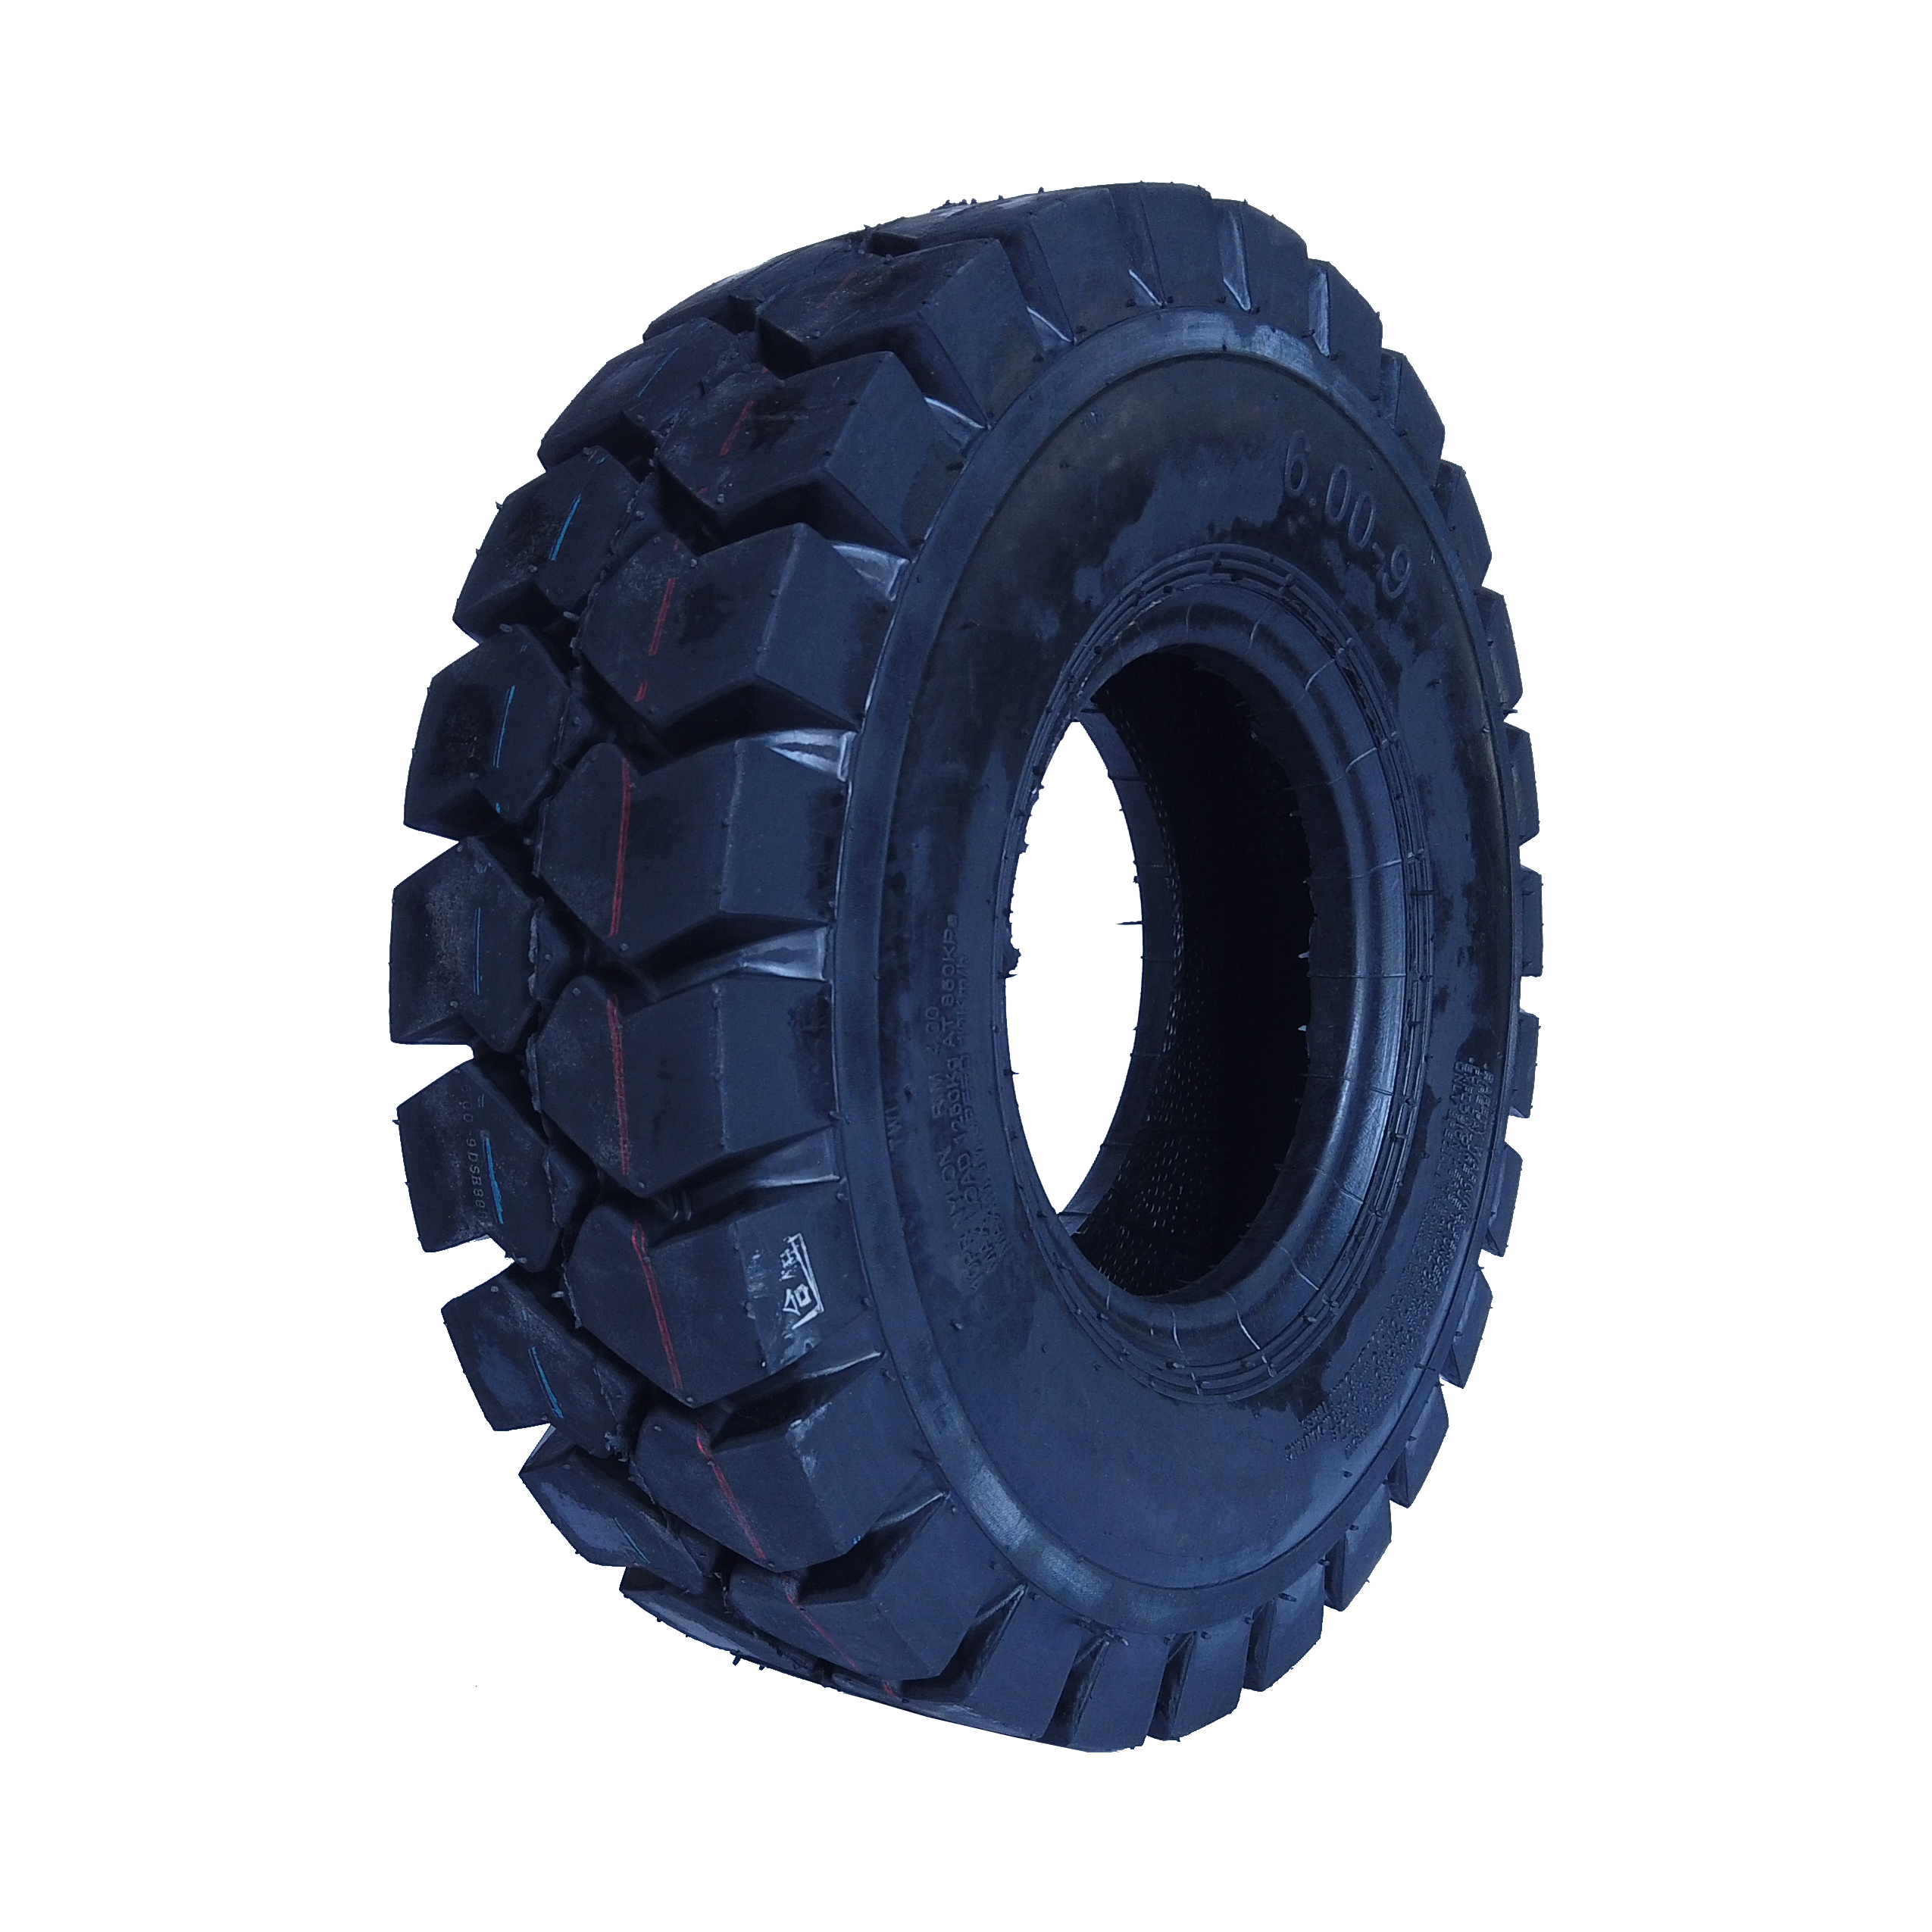 Hot Sale Techleader Forklift Parts 7.00-12 Pneumatic forklift Tire With Rims  